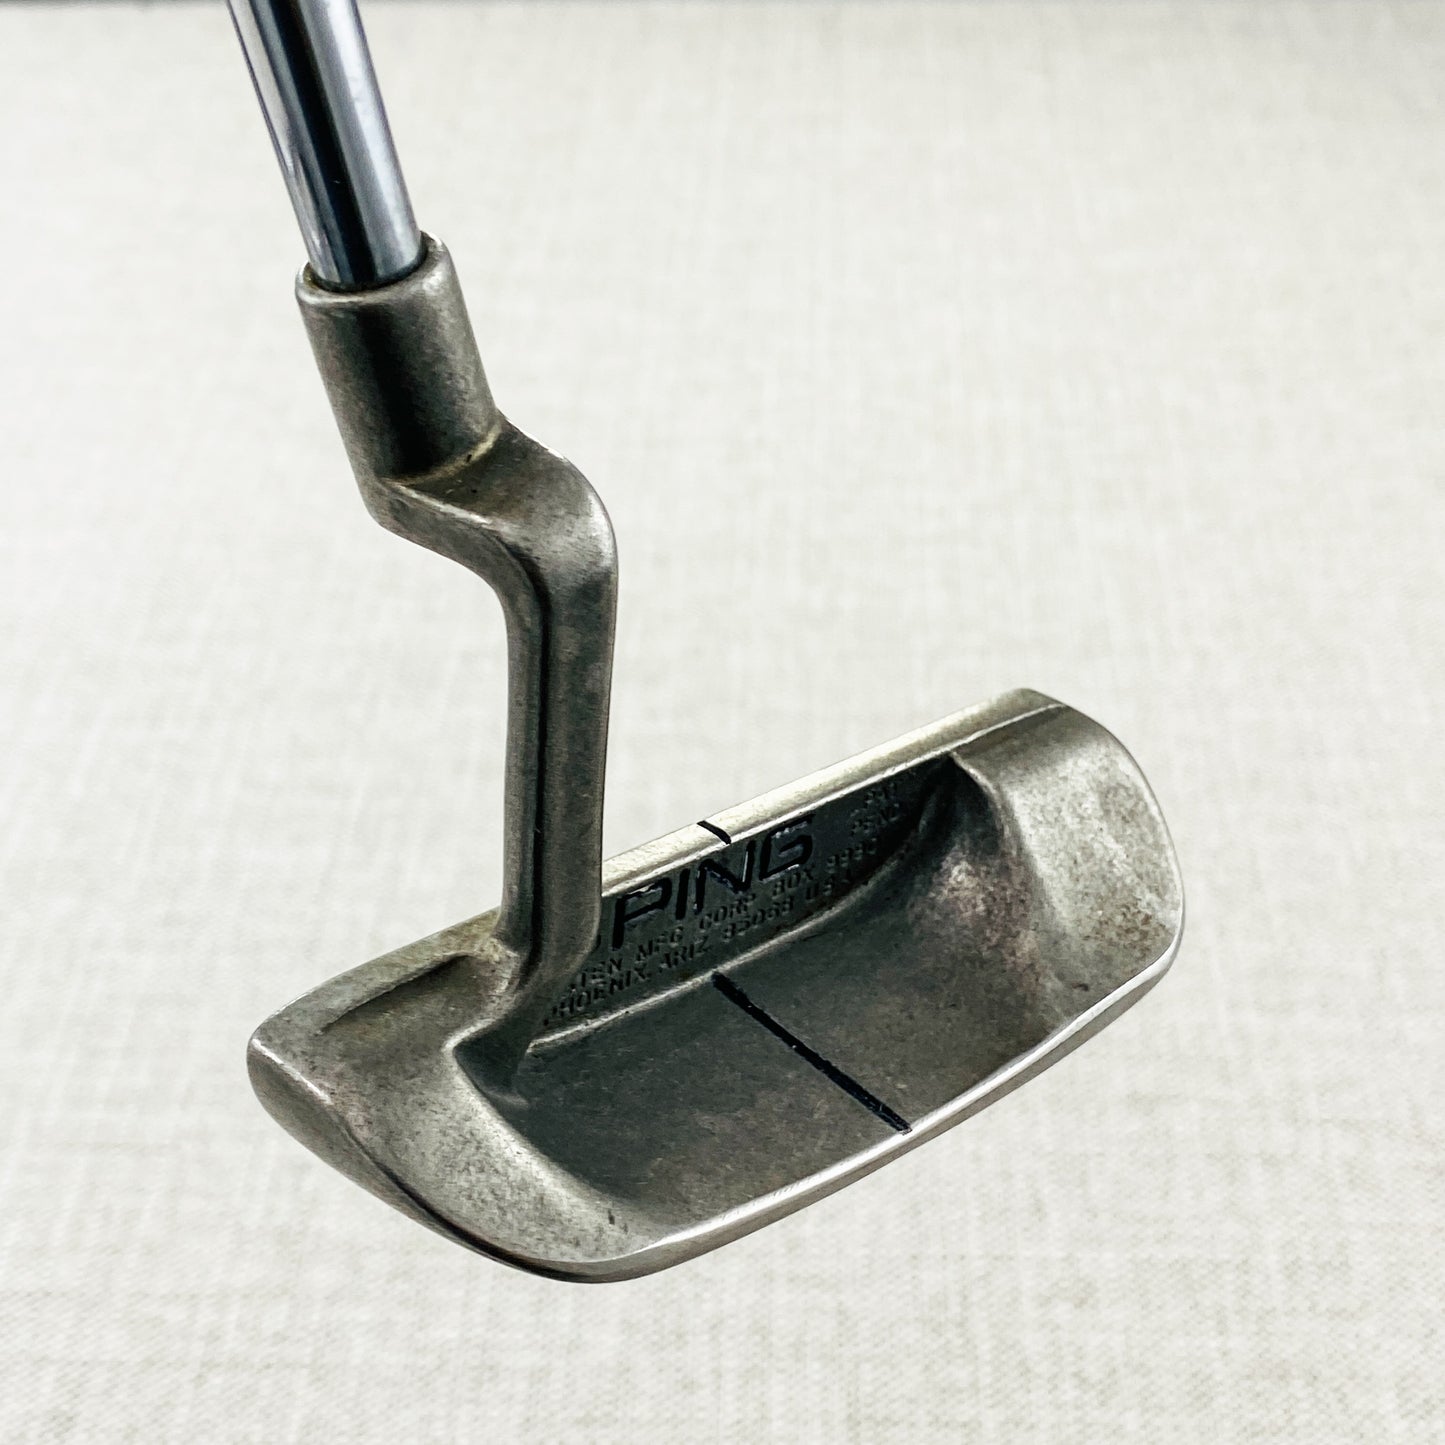 PING B60 Stainless Putter. 33.5 inch - Very Good Condition # T684